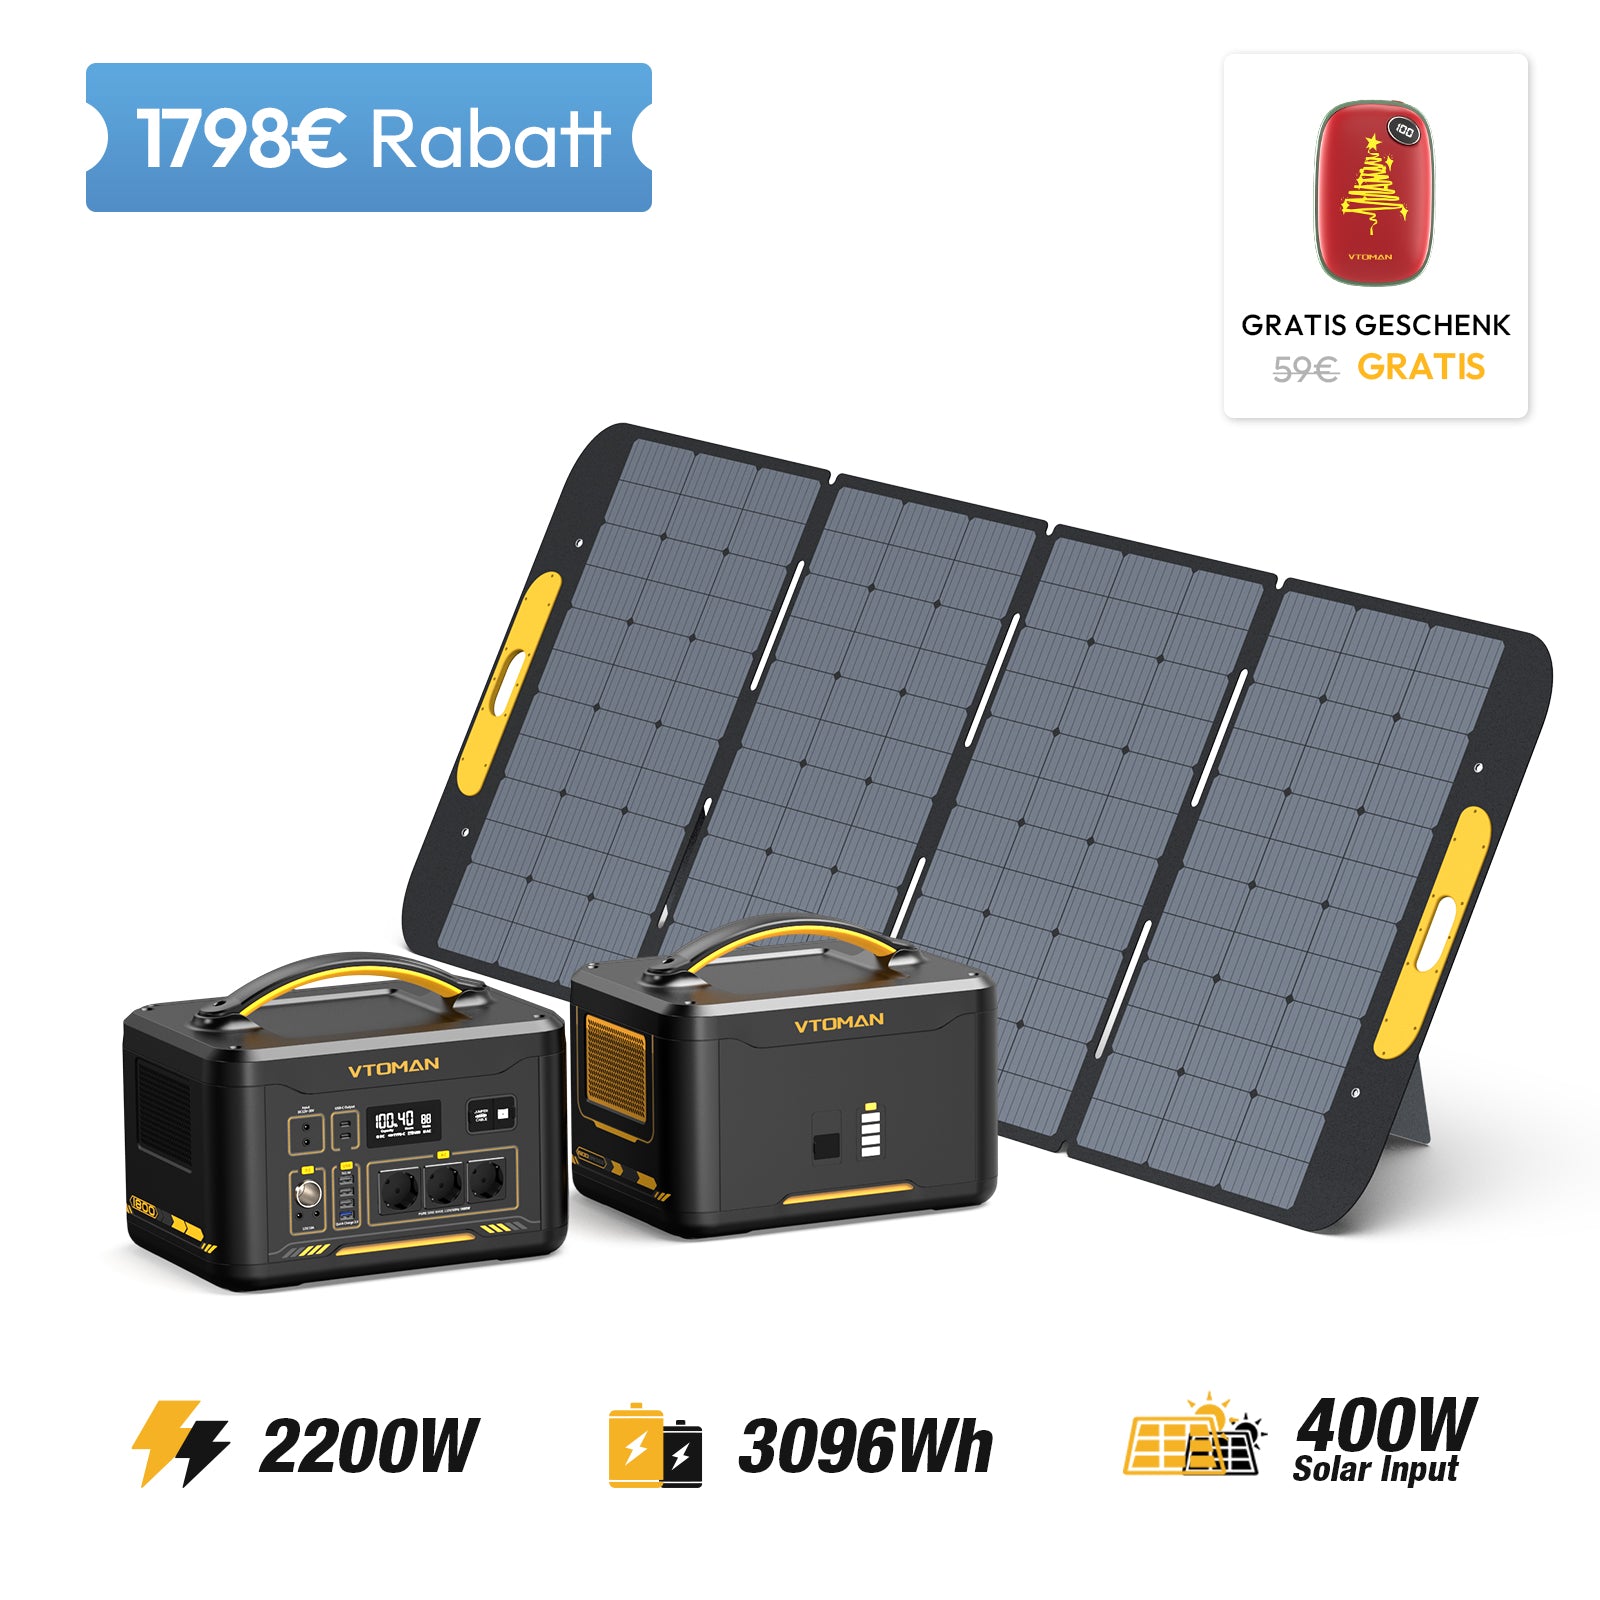 Jump 2200W/4644Wh 220W Solargenerator